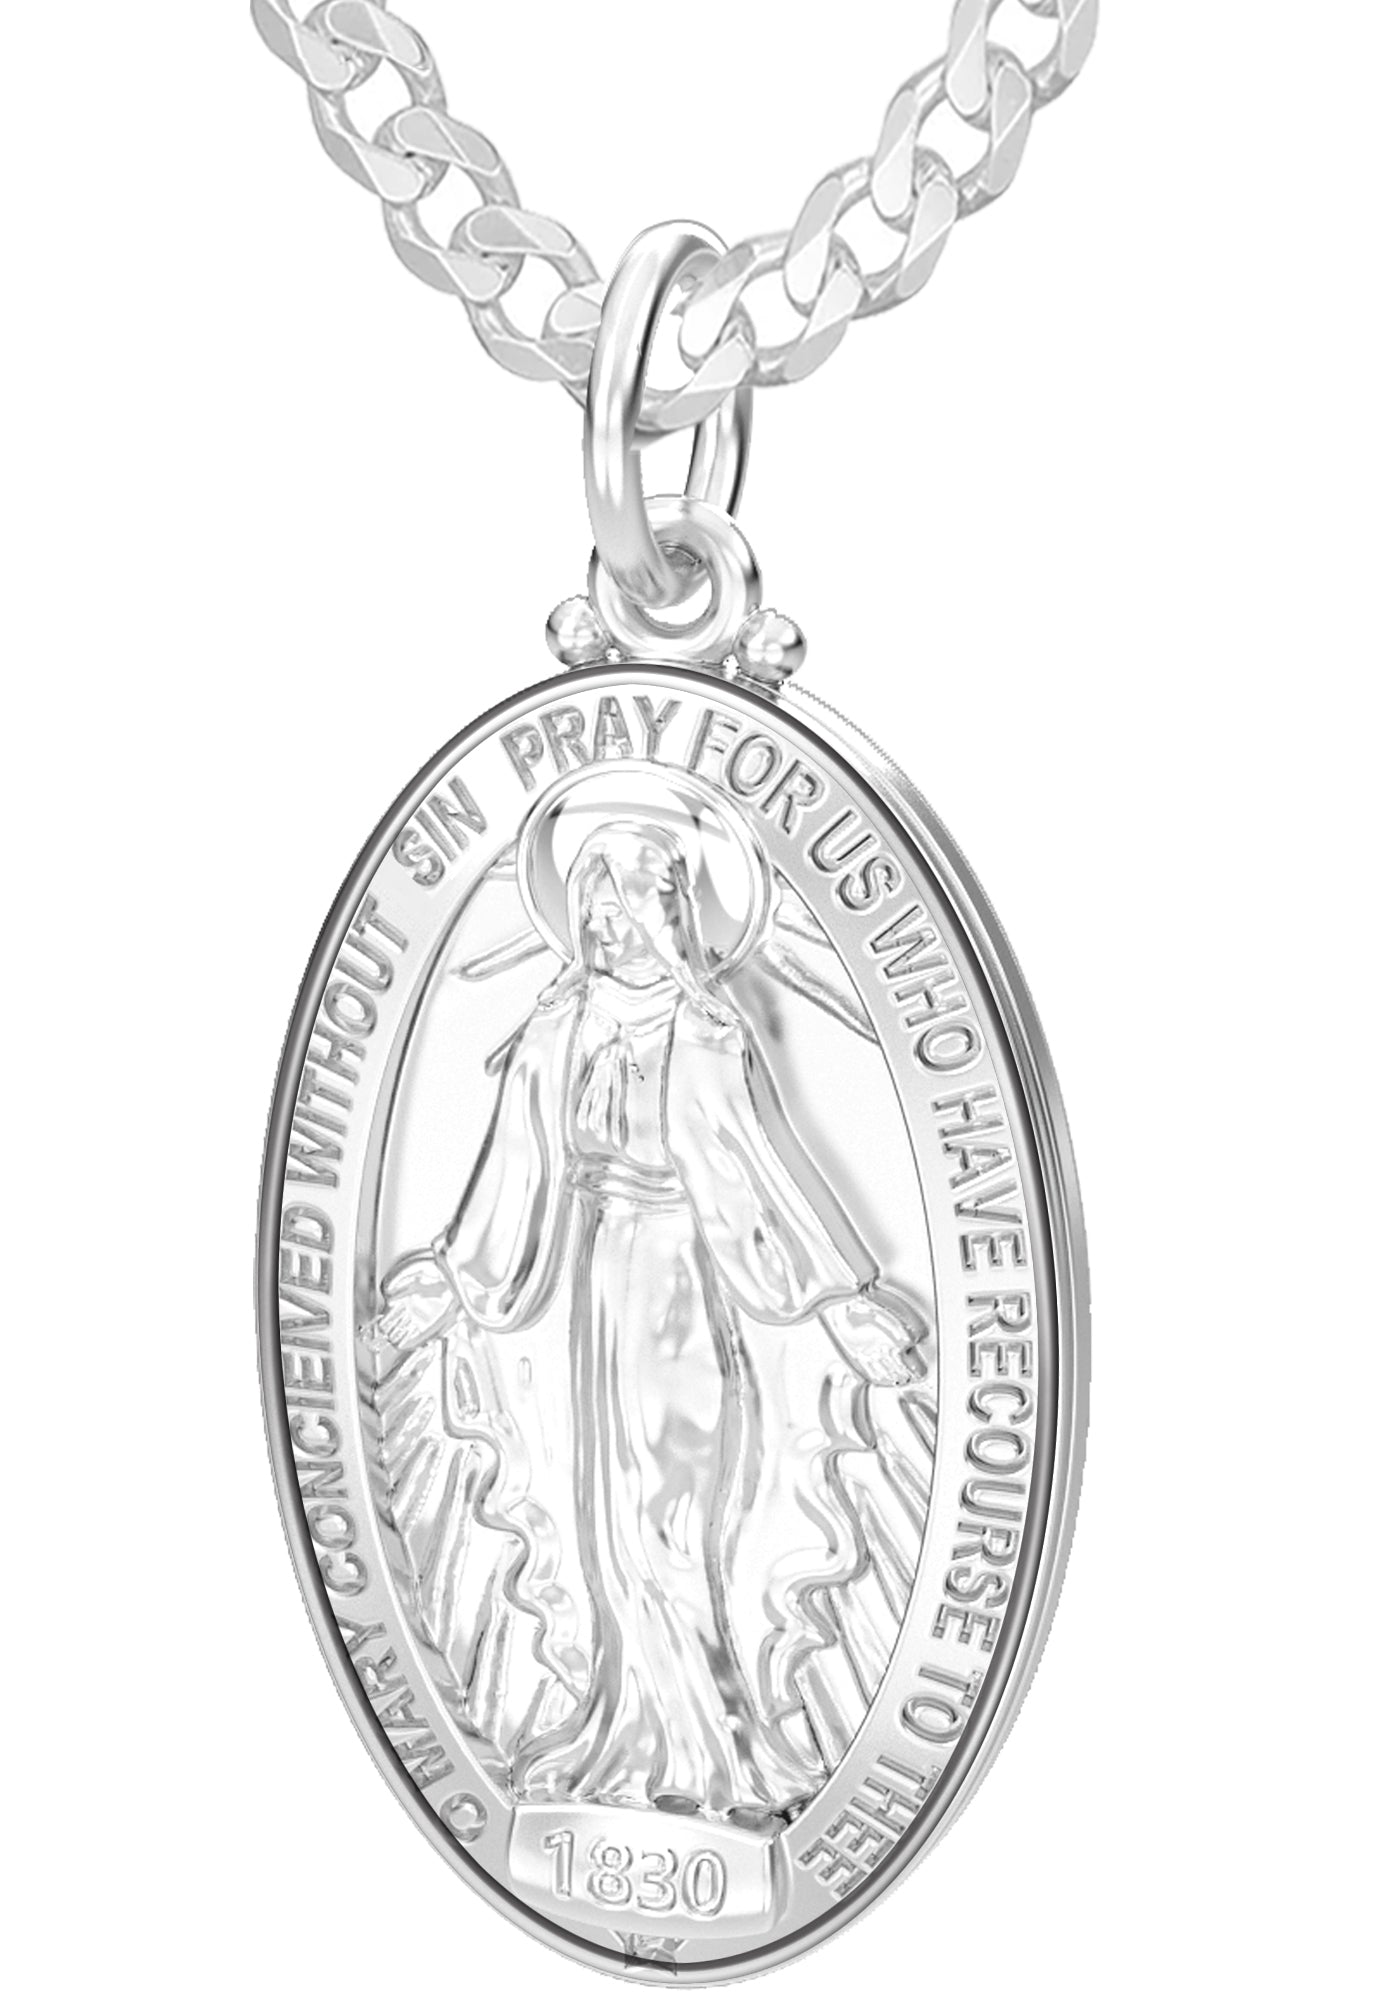 Large Polished 925 Sterling Silver Miraculous Virgin Mary Pendant Necklace, 32mm - US Jewels